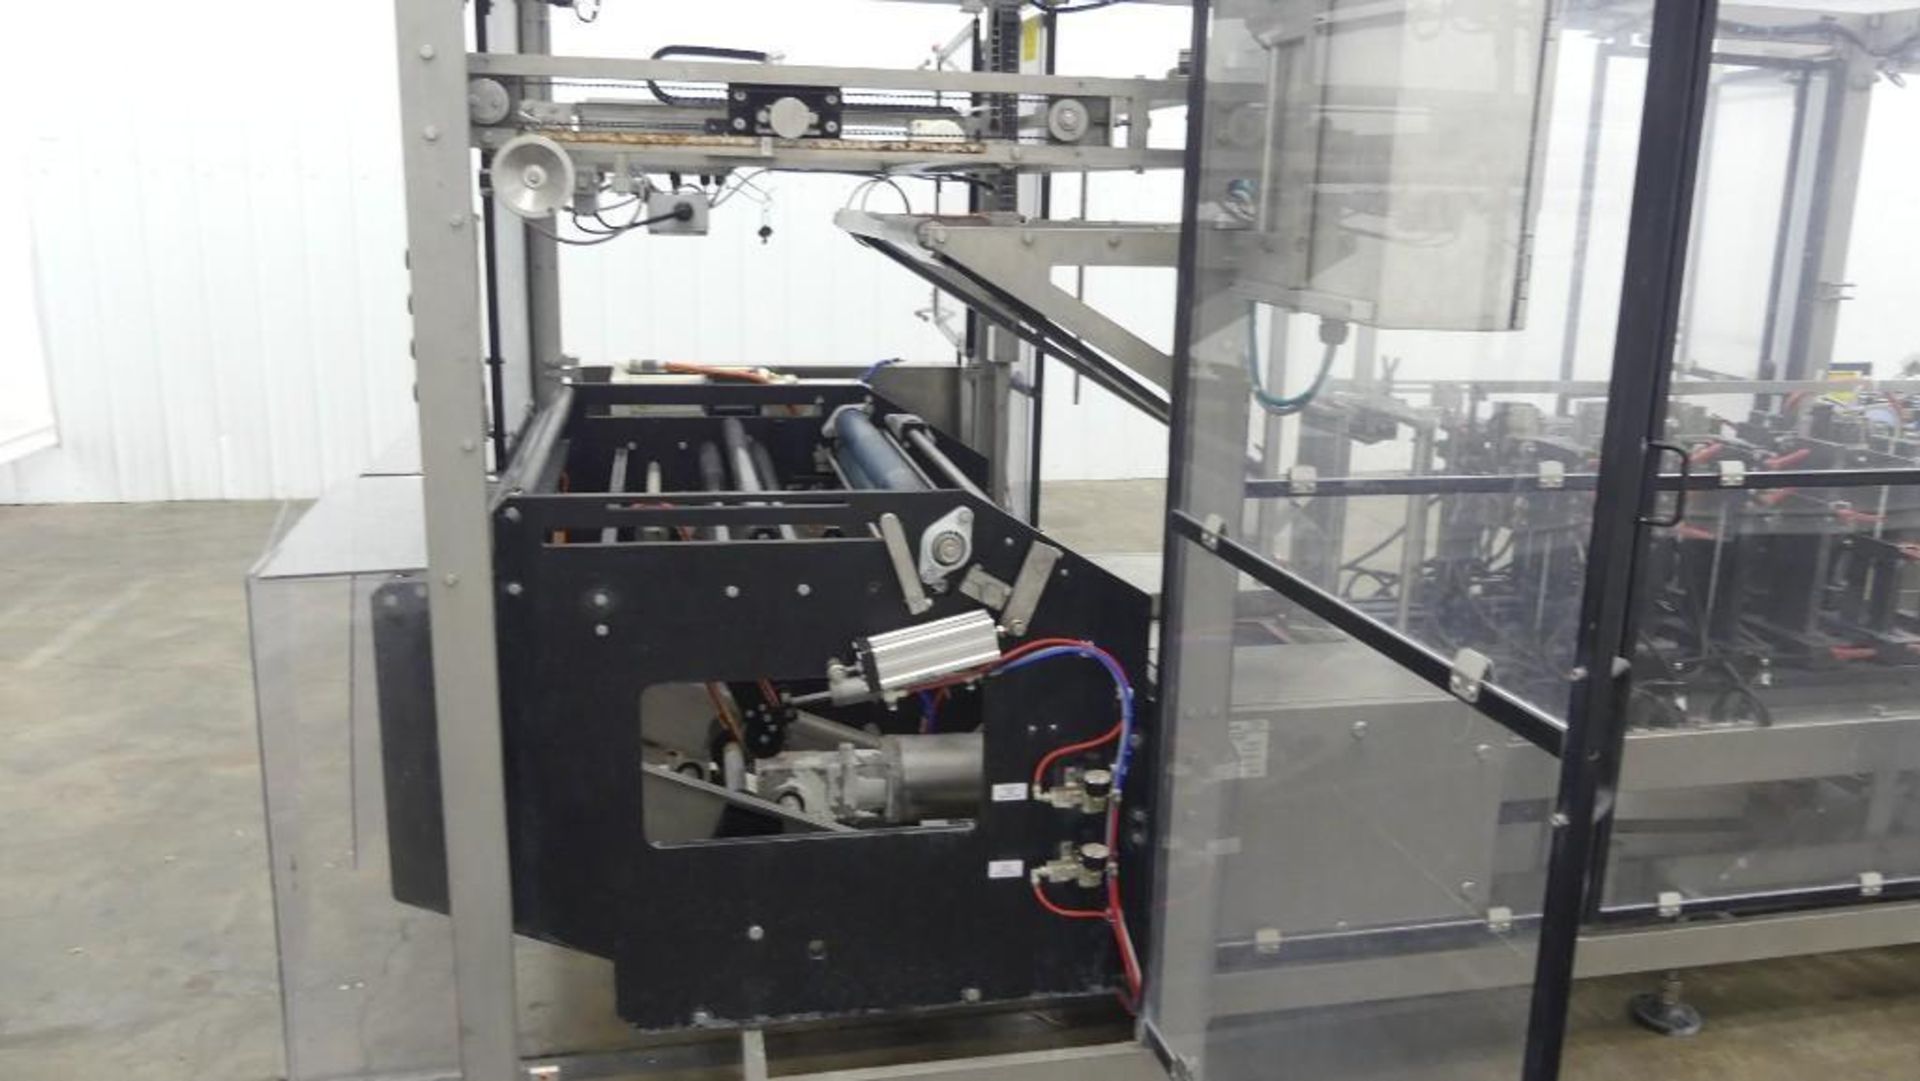 Massman HFFS-IM0800 Flexible Pouch Packaging System - Image 13 of 29